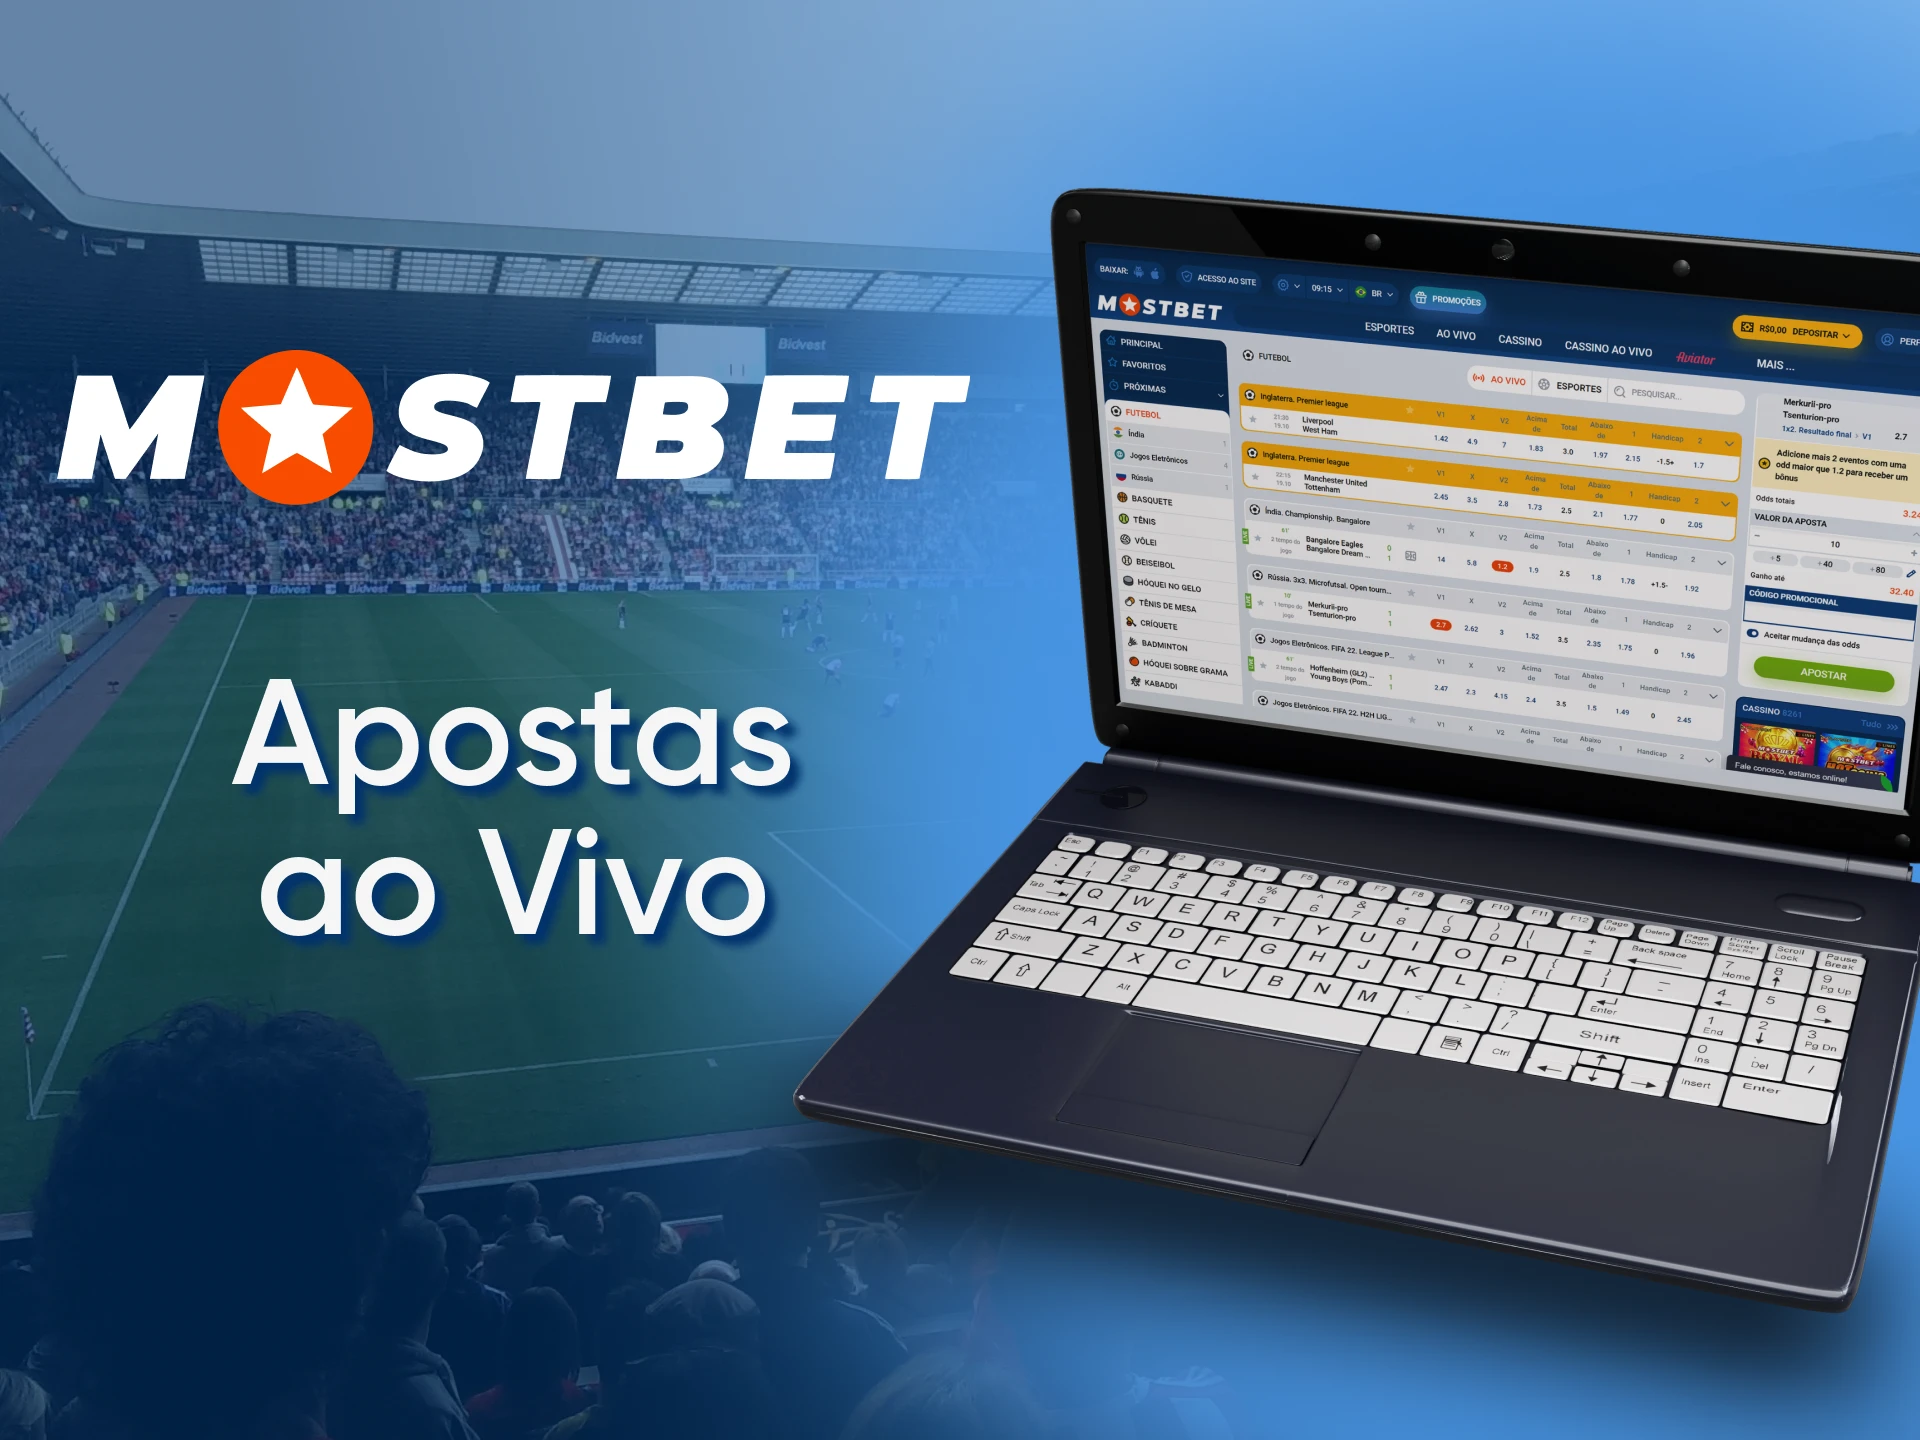 Mostbet supports live betting.